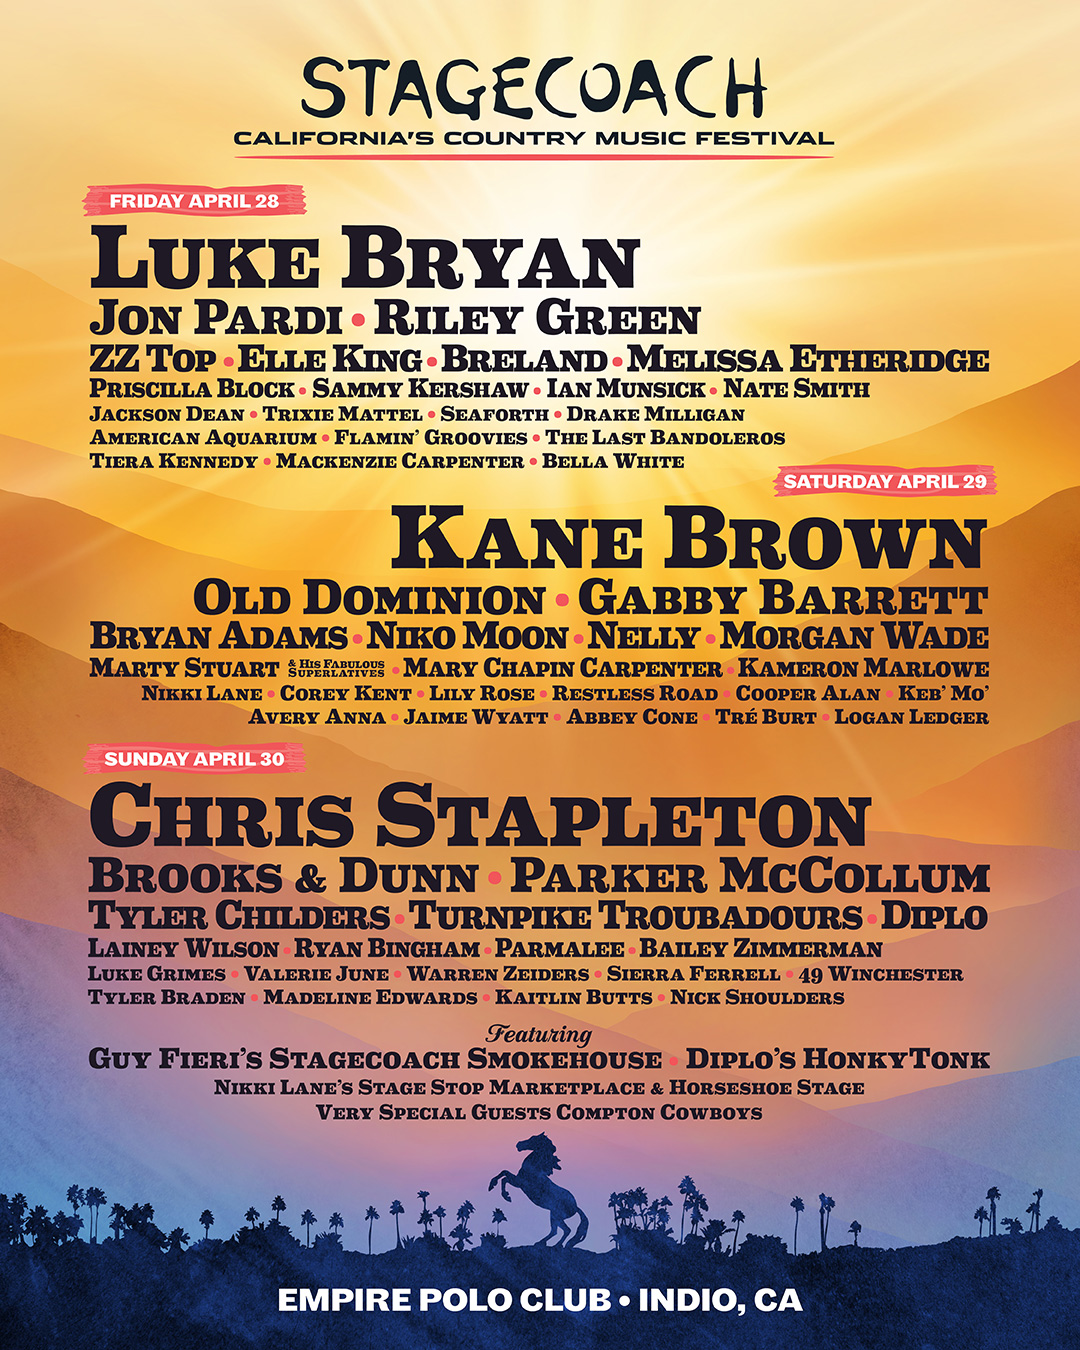 TOP 25 Country Music Festivals in the USA 2022 (Updated) The Insight Post